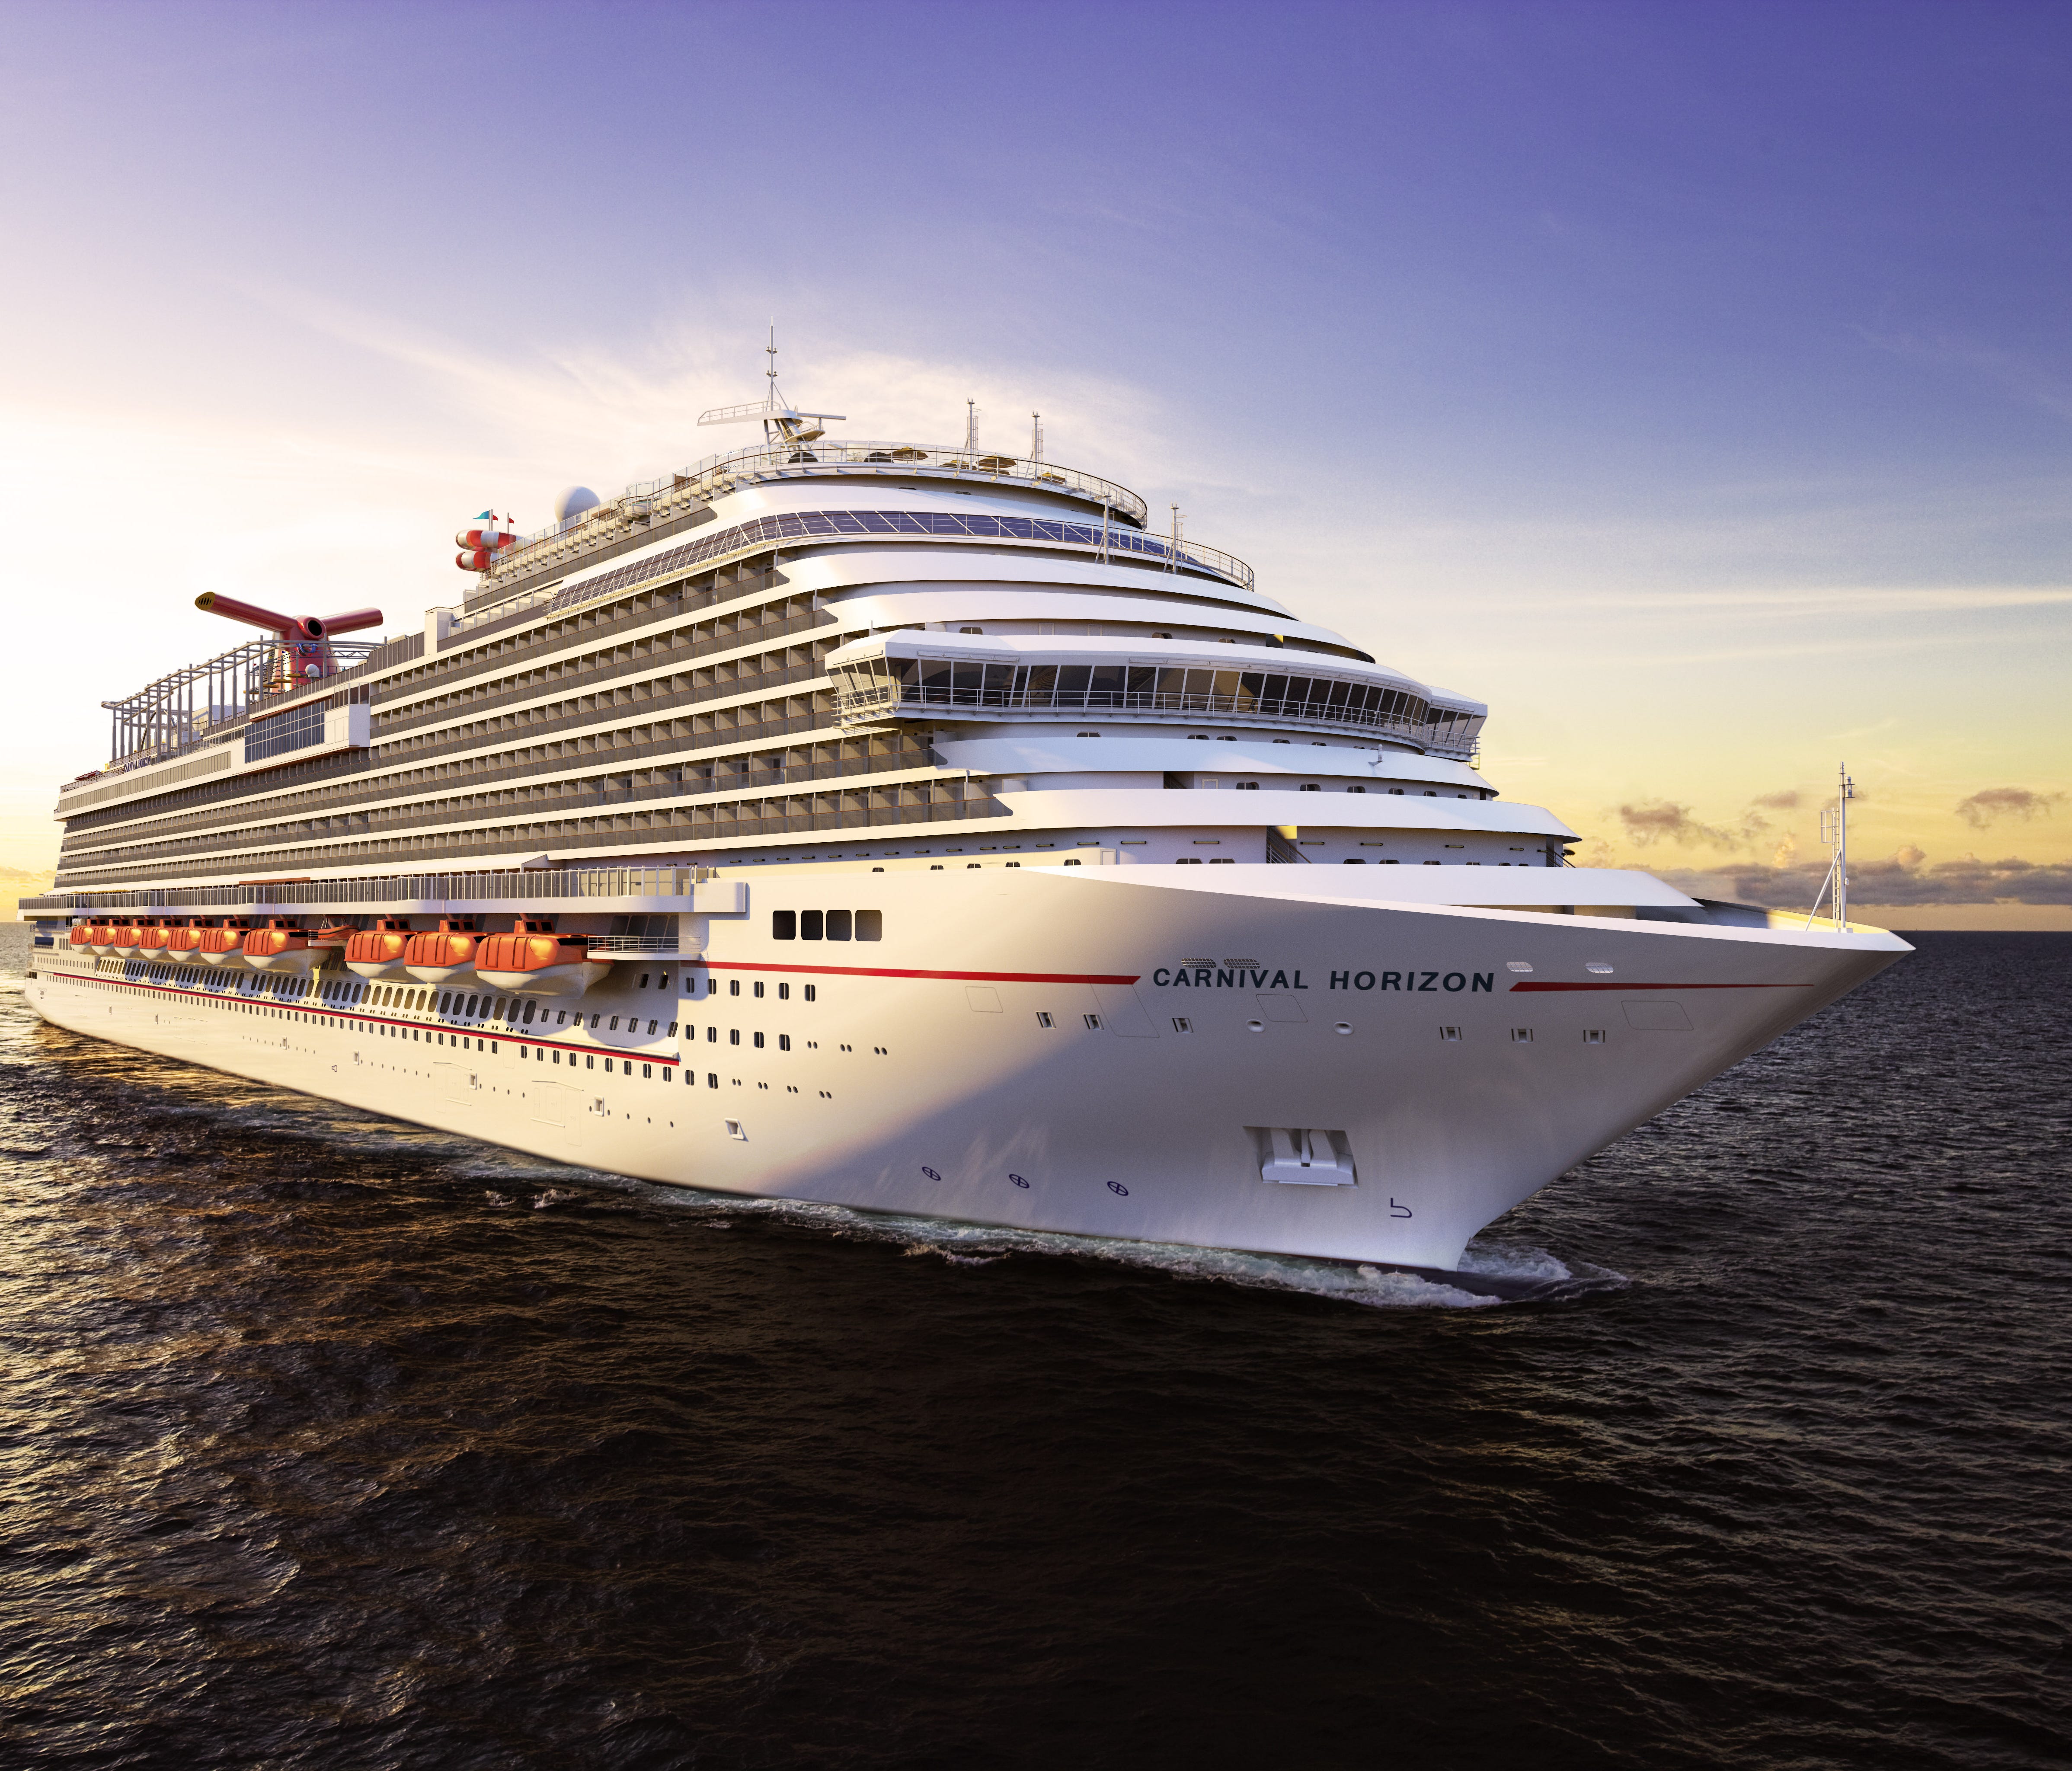 A sister ship to Carnival Vista to be called Carnival Horizon is scheduled to debut in April 2018. Like Vista, it'll measure 133,500 tons and carry 3,954 passengers, based on double occupancy.